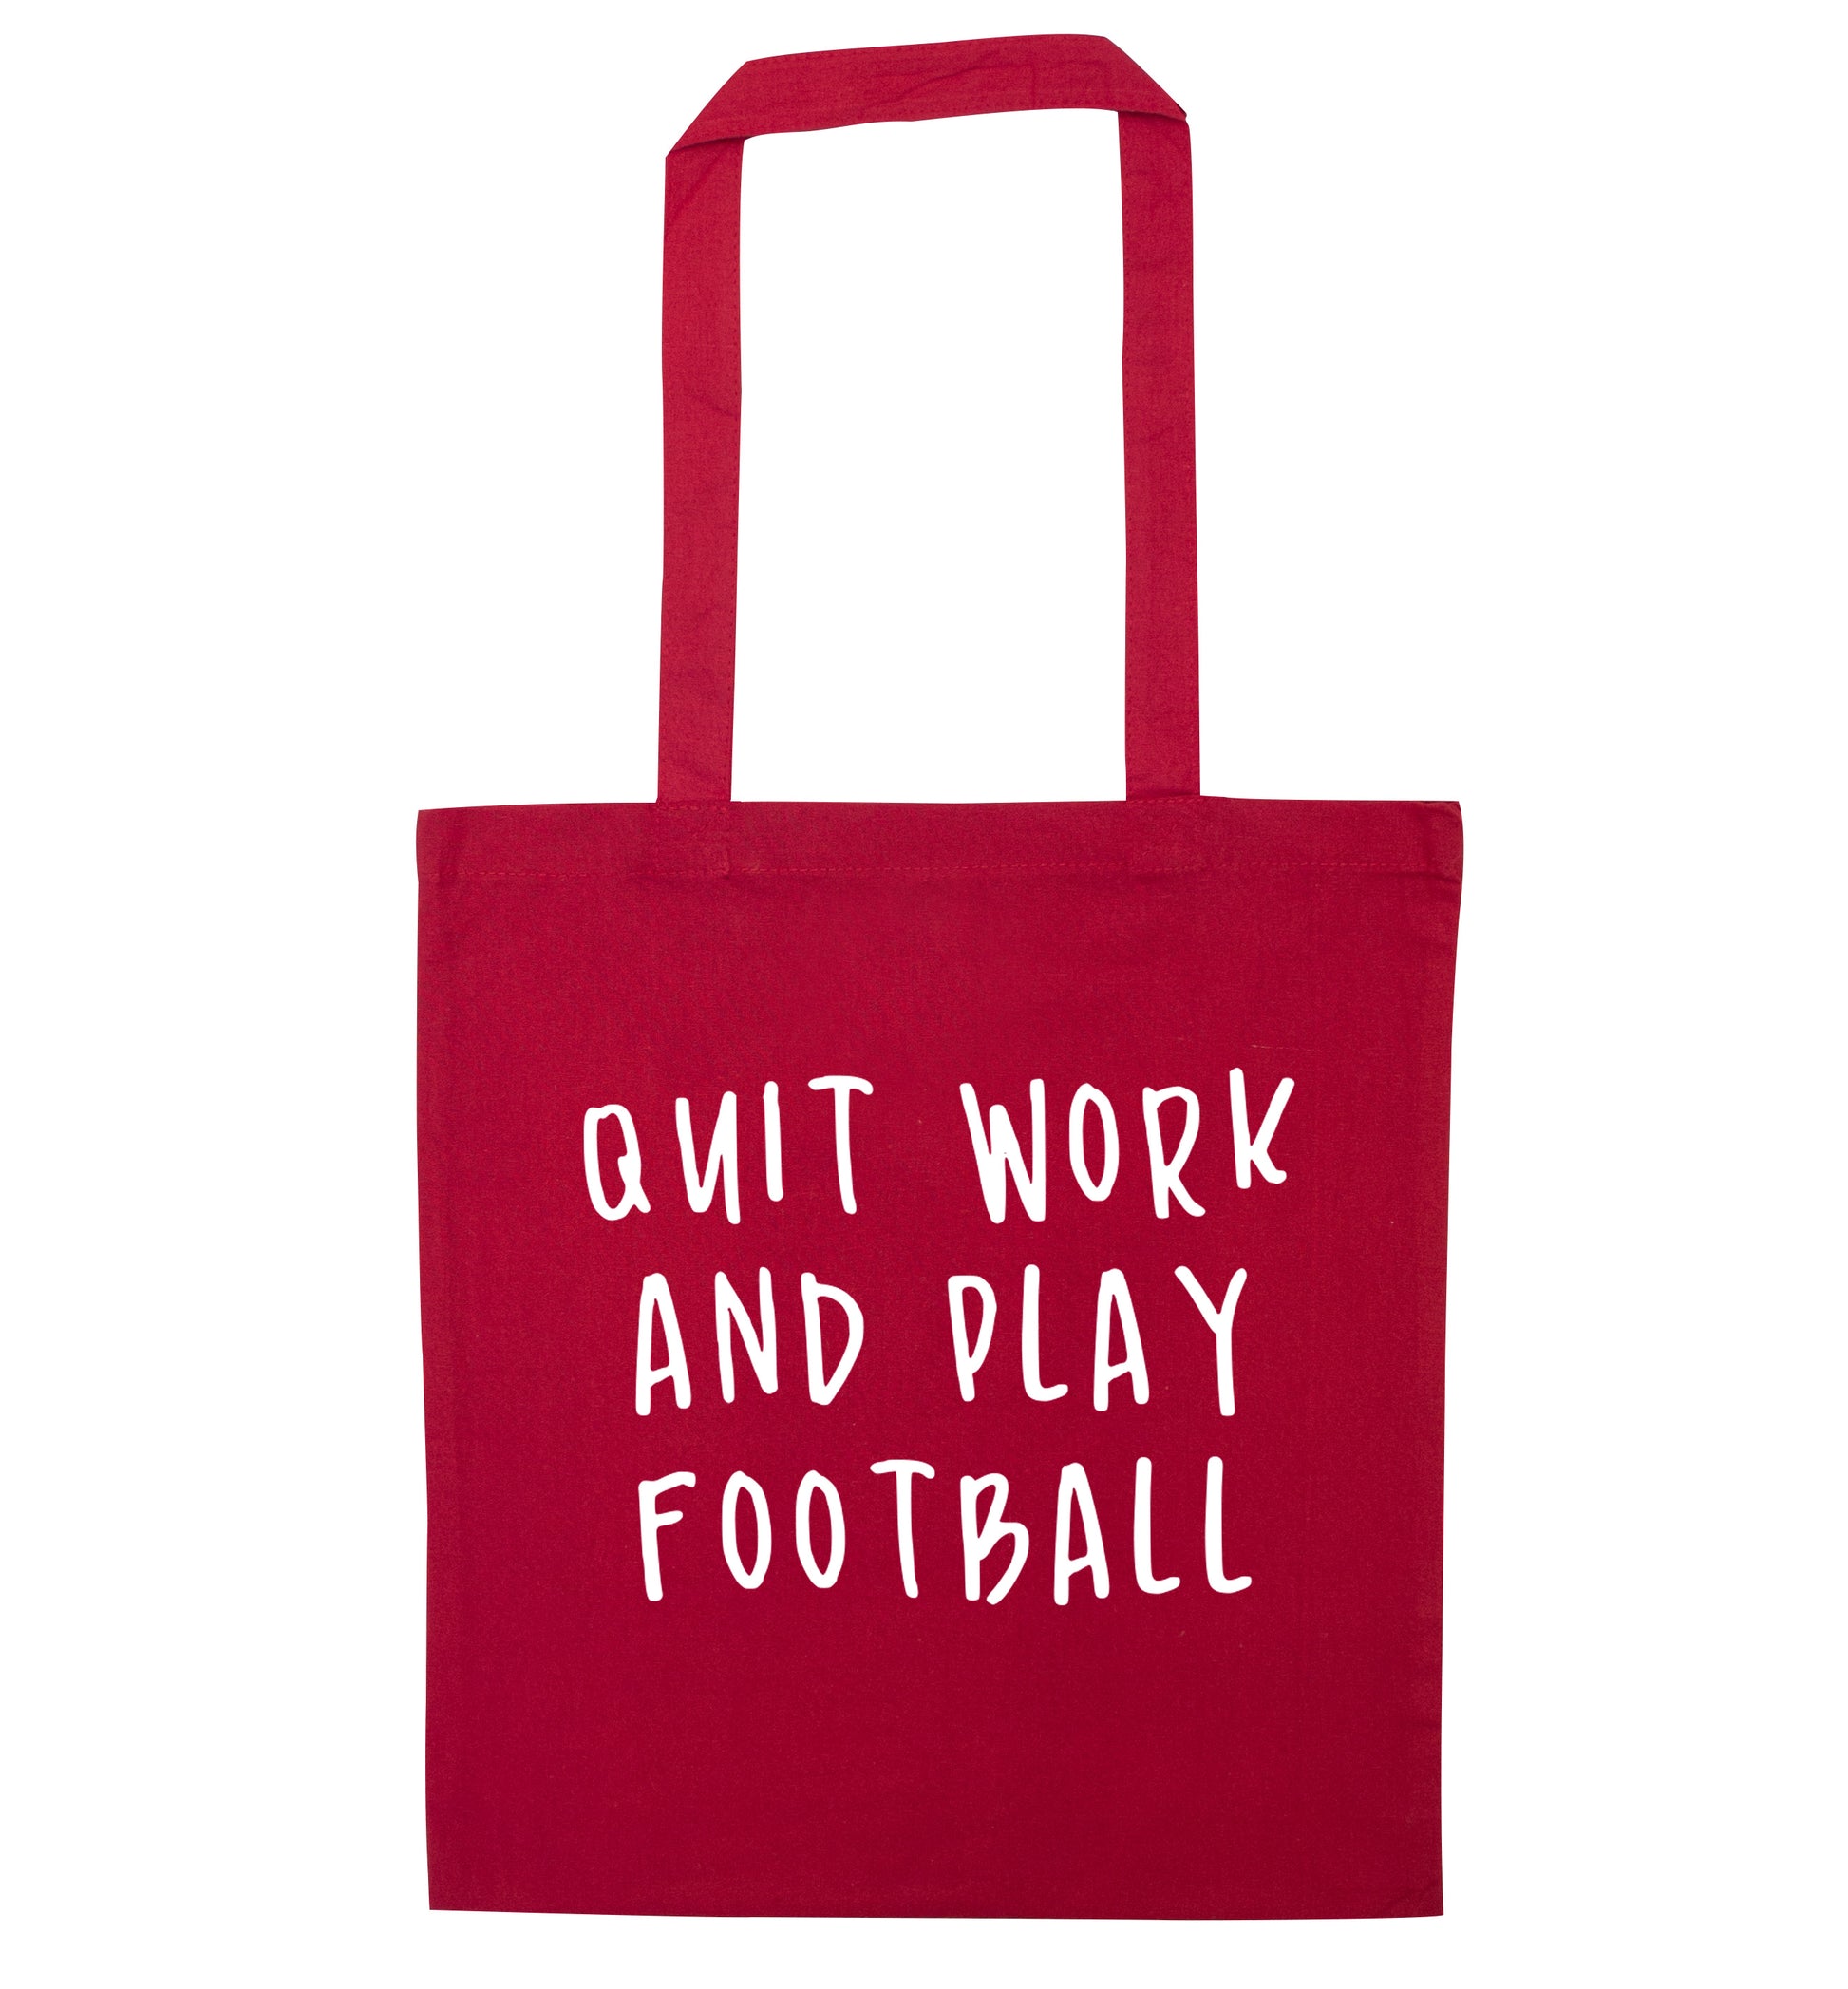 Quit work play football red tote bag